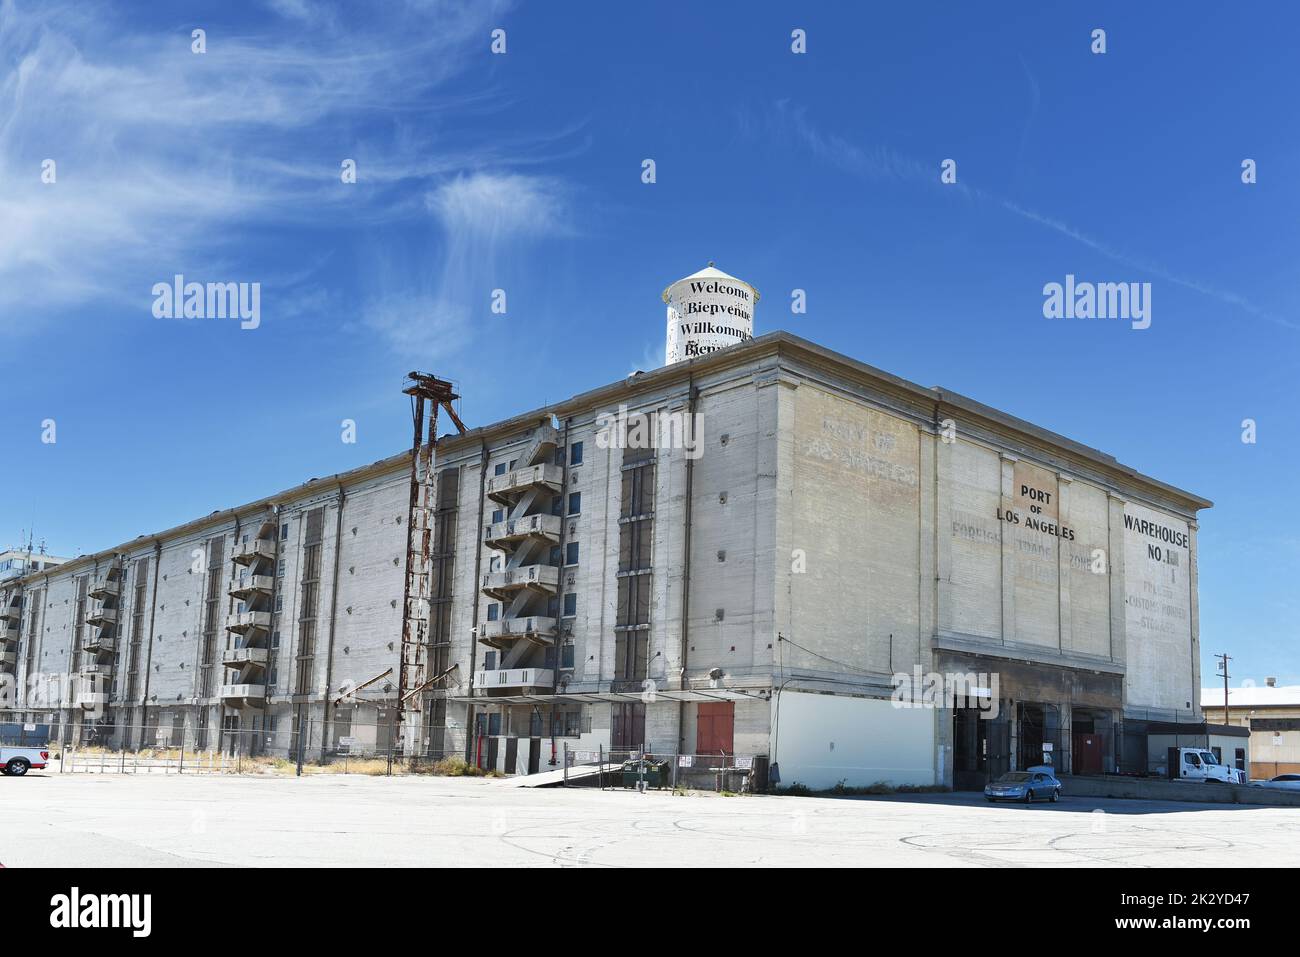 SAN PEDRO, CALIFORNIA - 21 SEPT 2022: Built in 1917 Warehouse No. 1 is a six story warehouse on the outermost point of land on the main channel at the Stock Photo